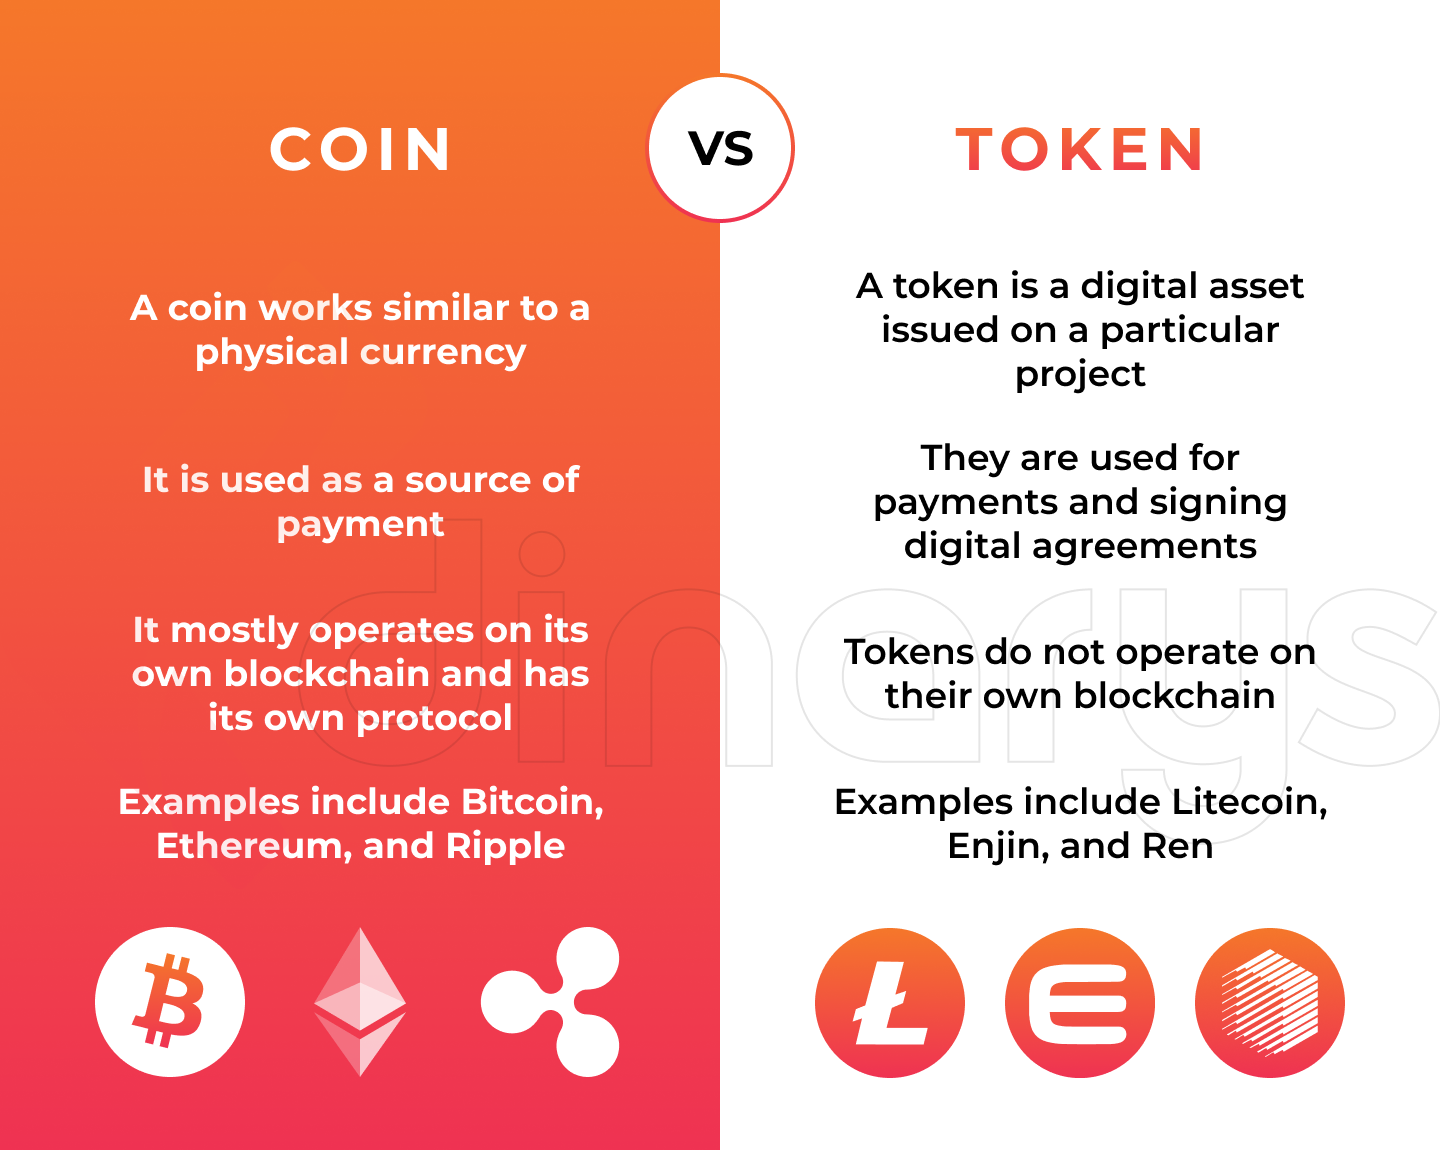 What is the difference between a coin and a token?